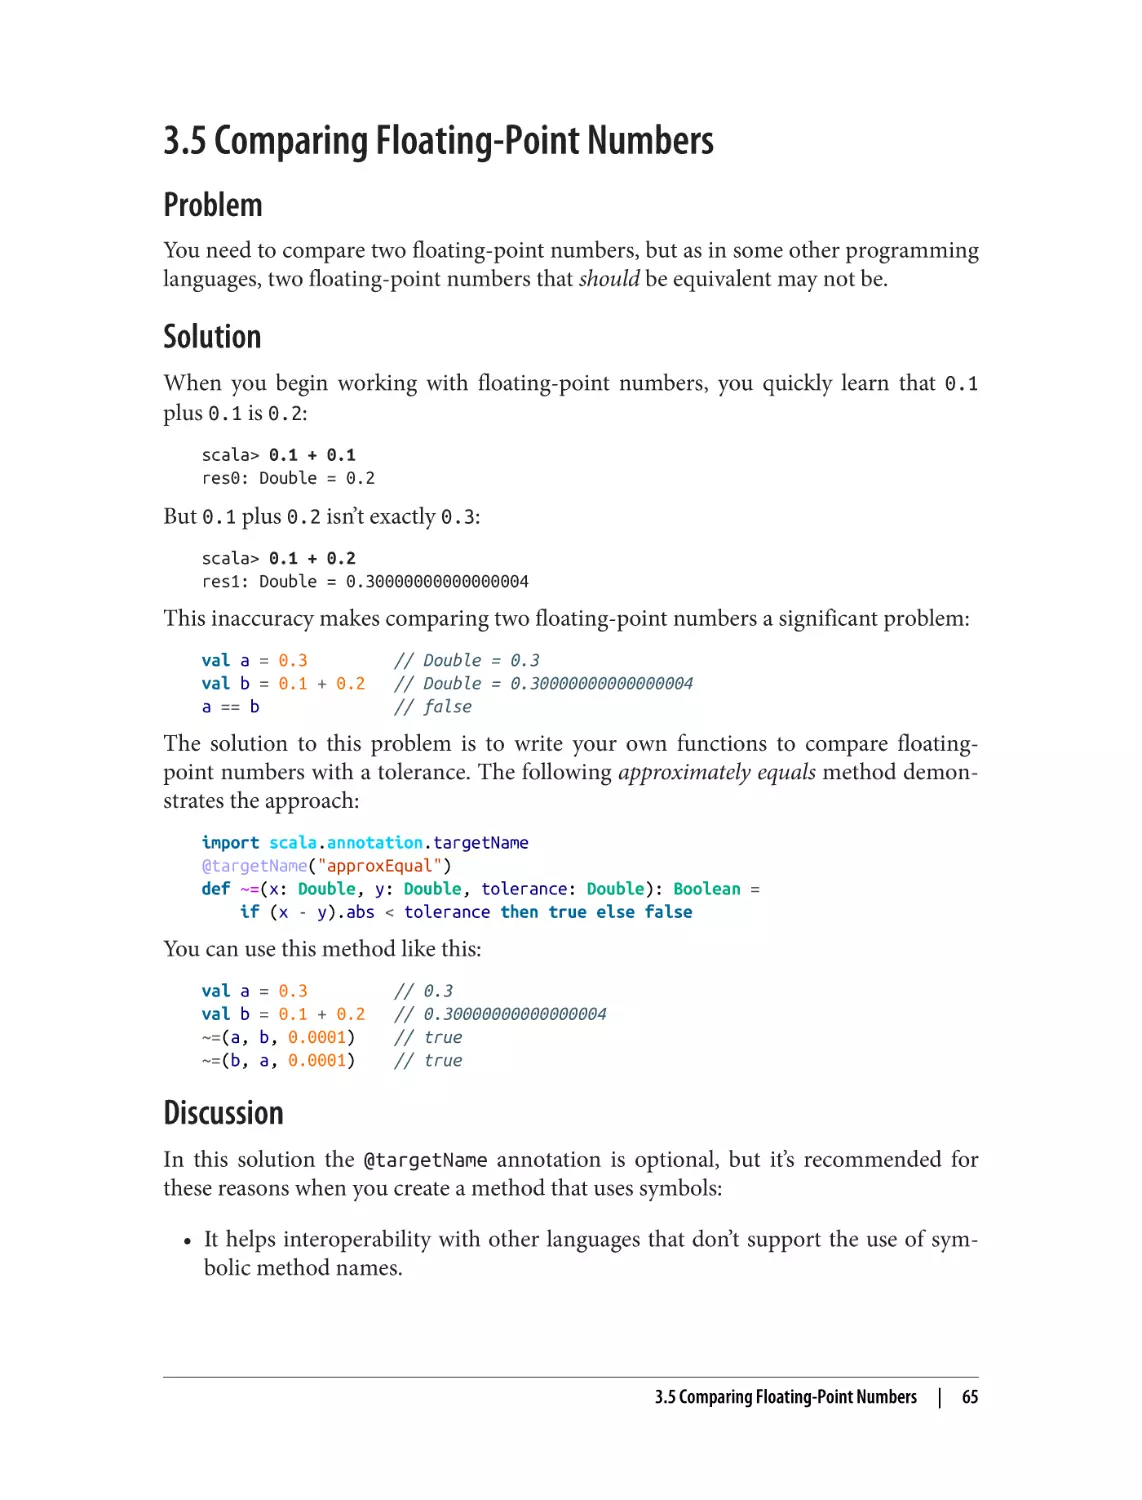 3.5 Comparing Floating-Point Numbers
Problem
Solution
Discussion